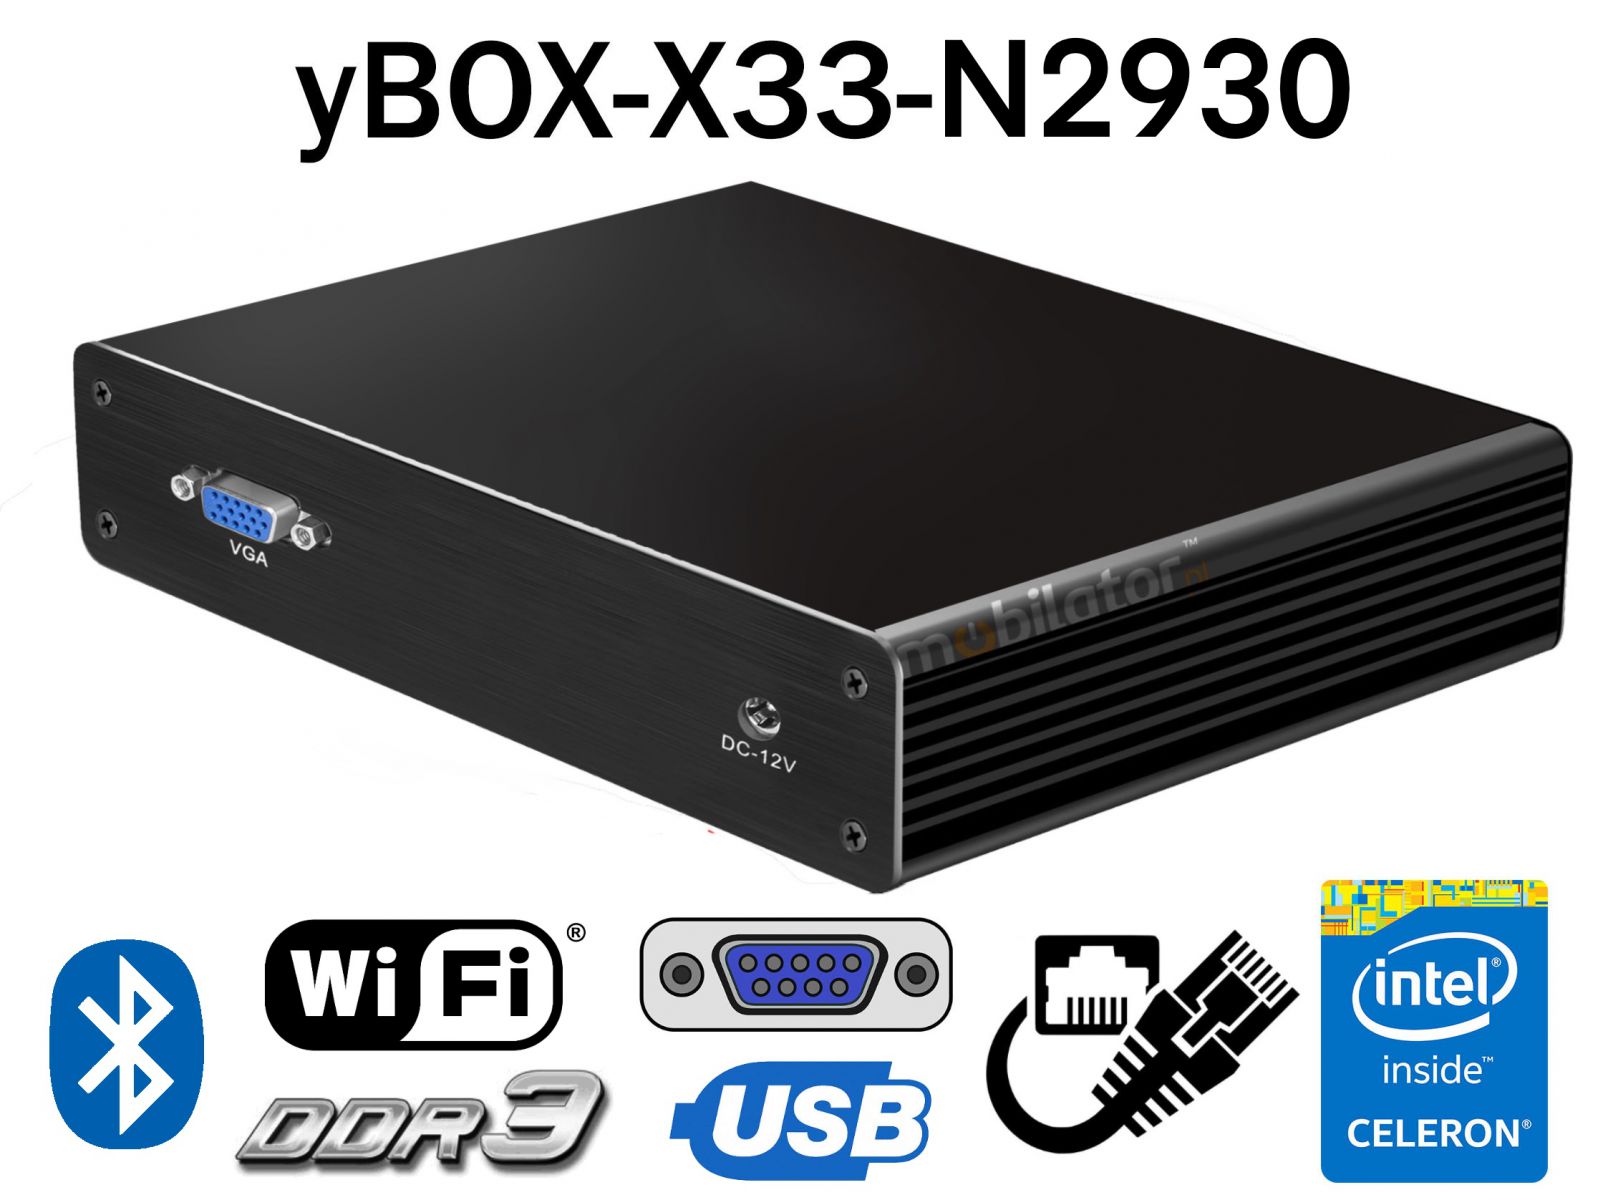 Reinforced industrial computer with 4GB RAM, WiFi+Bluetooth and M. 2 SSD support, 64GB SSD for office and work yBOX-X33-(6xLAN)-N2930 v. 1